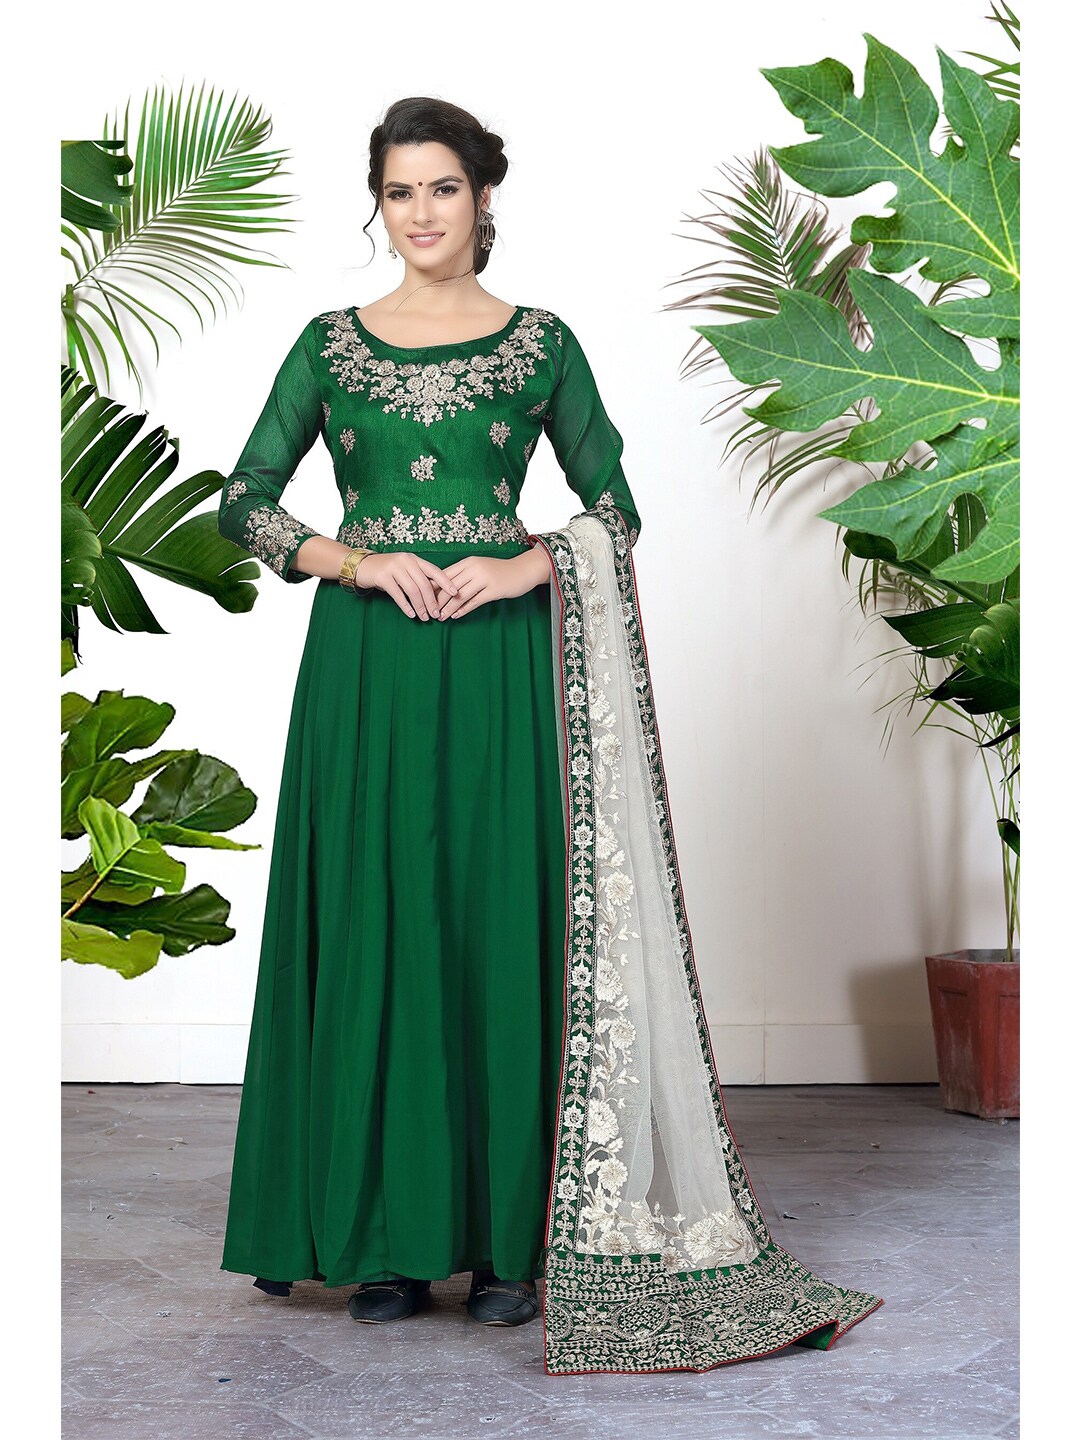 Divine International Trading Co Green & White Embroidered Unstitched Dress Material Price in India